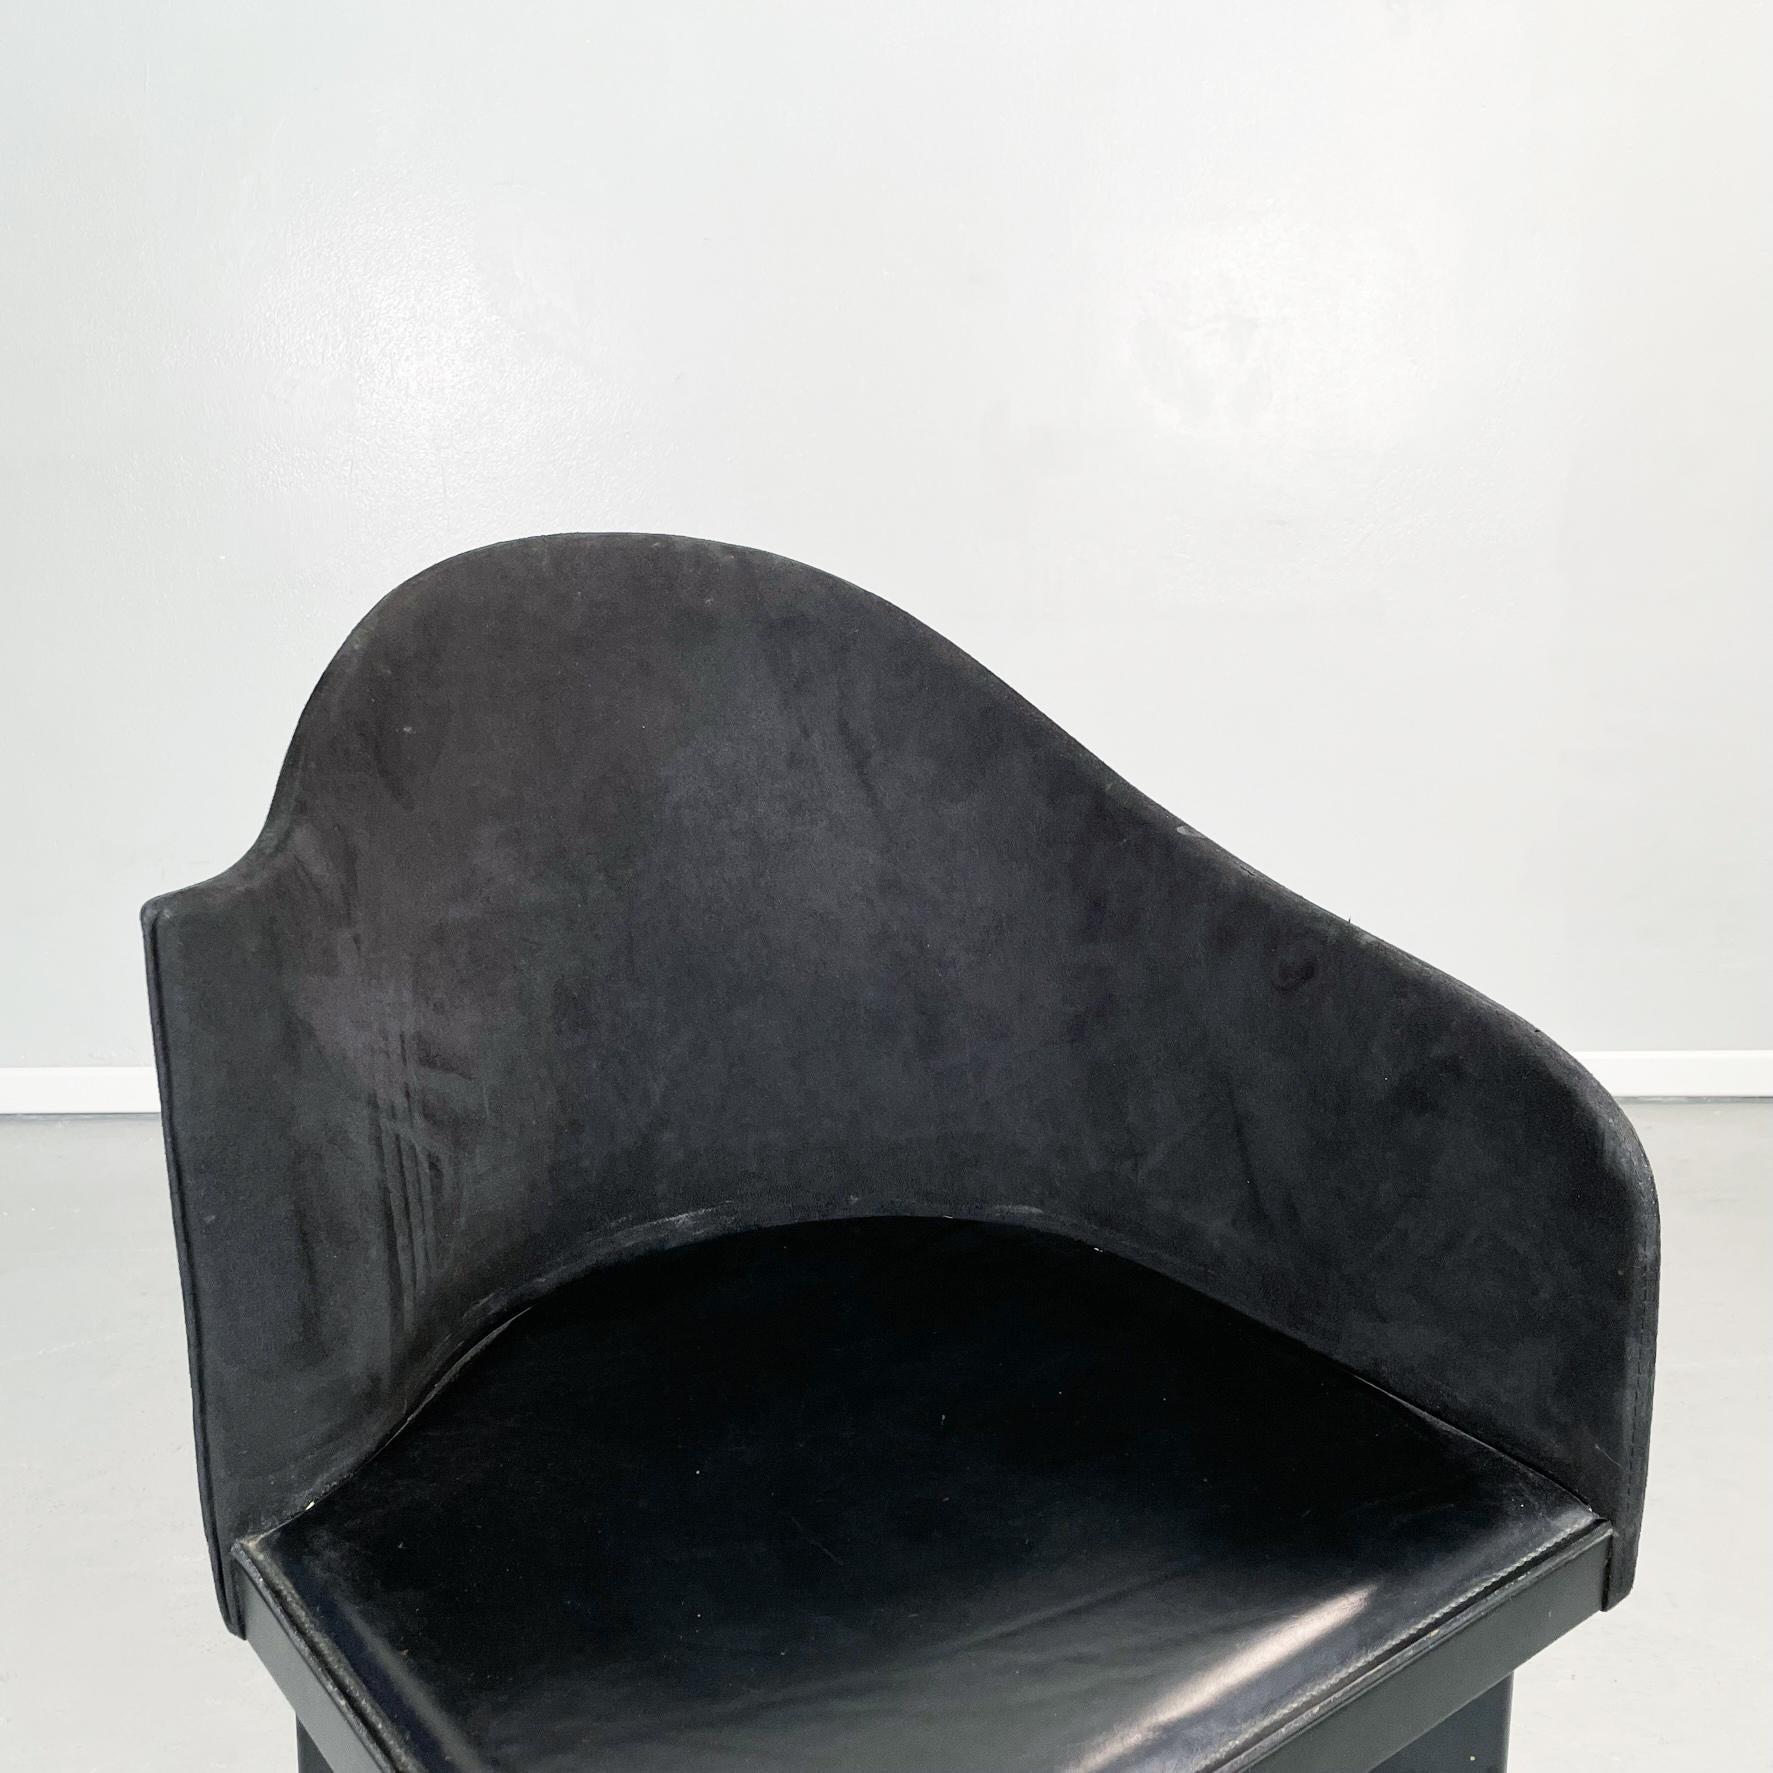 Italian Modern Black Chairs Toscana by Sartogo and Grenon for Saporiti, 1980s For Sale 2